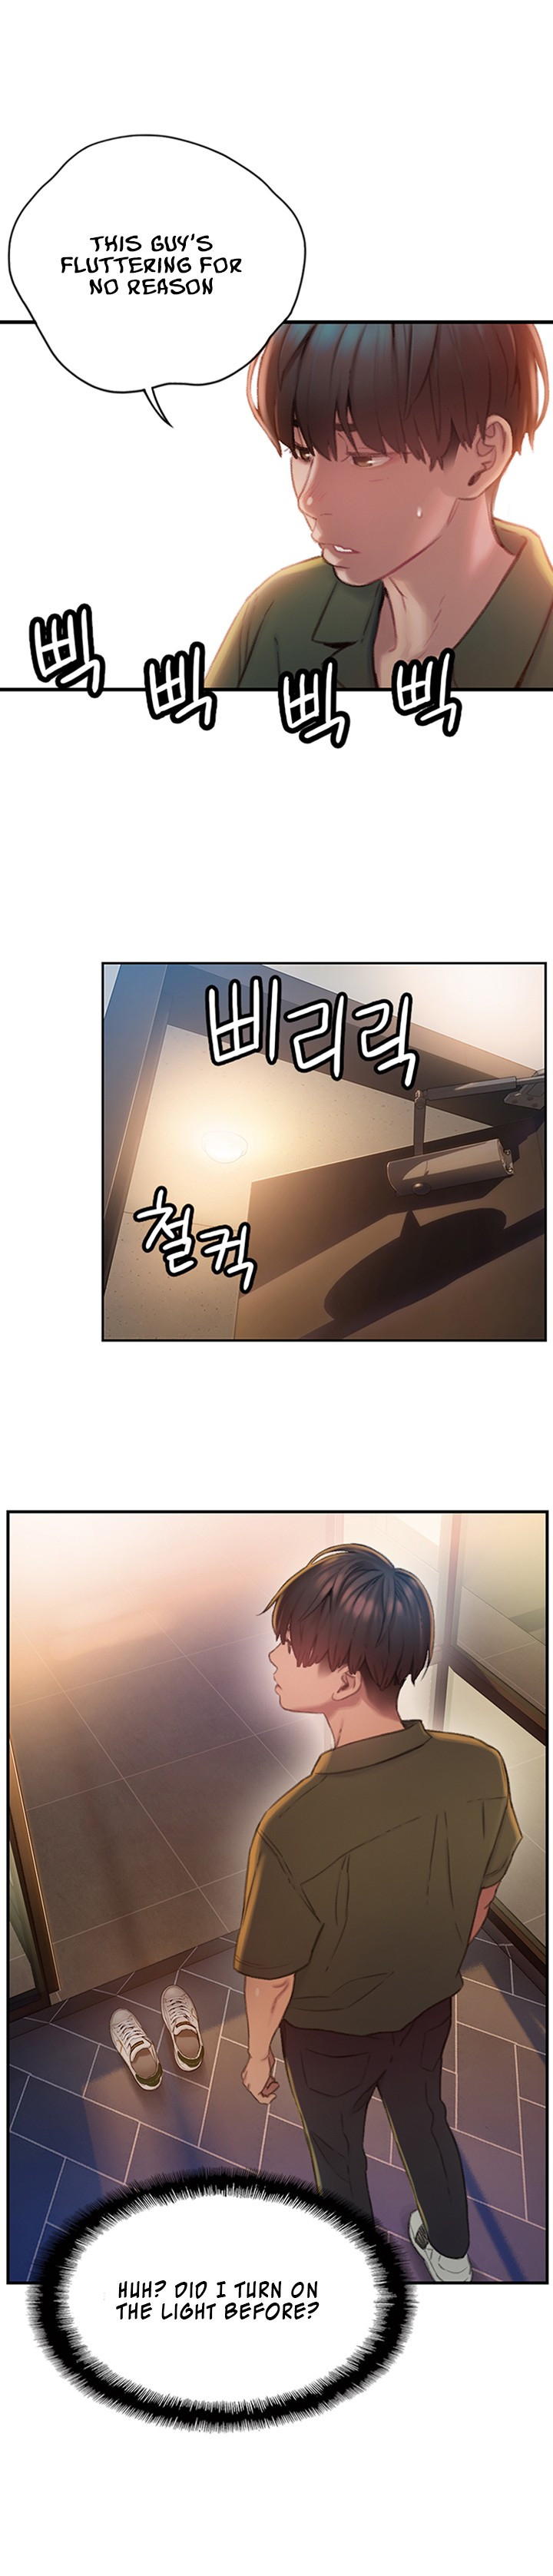 [Park Hyeongjun] Love Limit Exceeded (01-21) Ongoing - Page 31